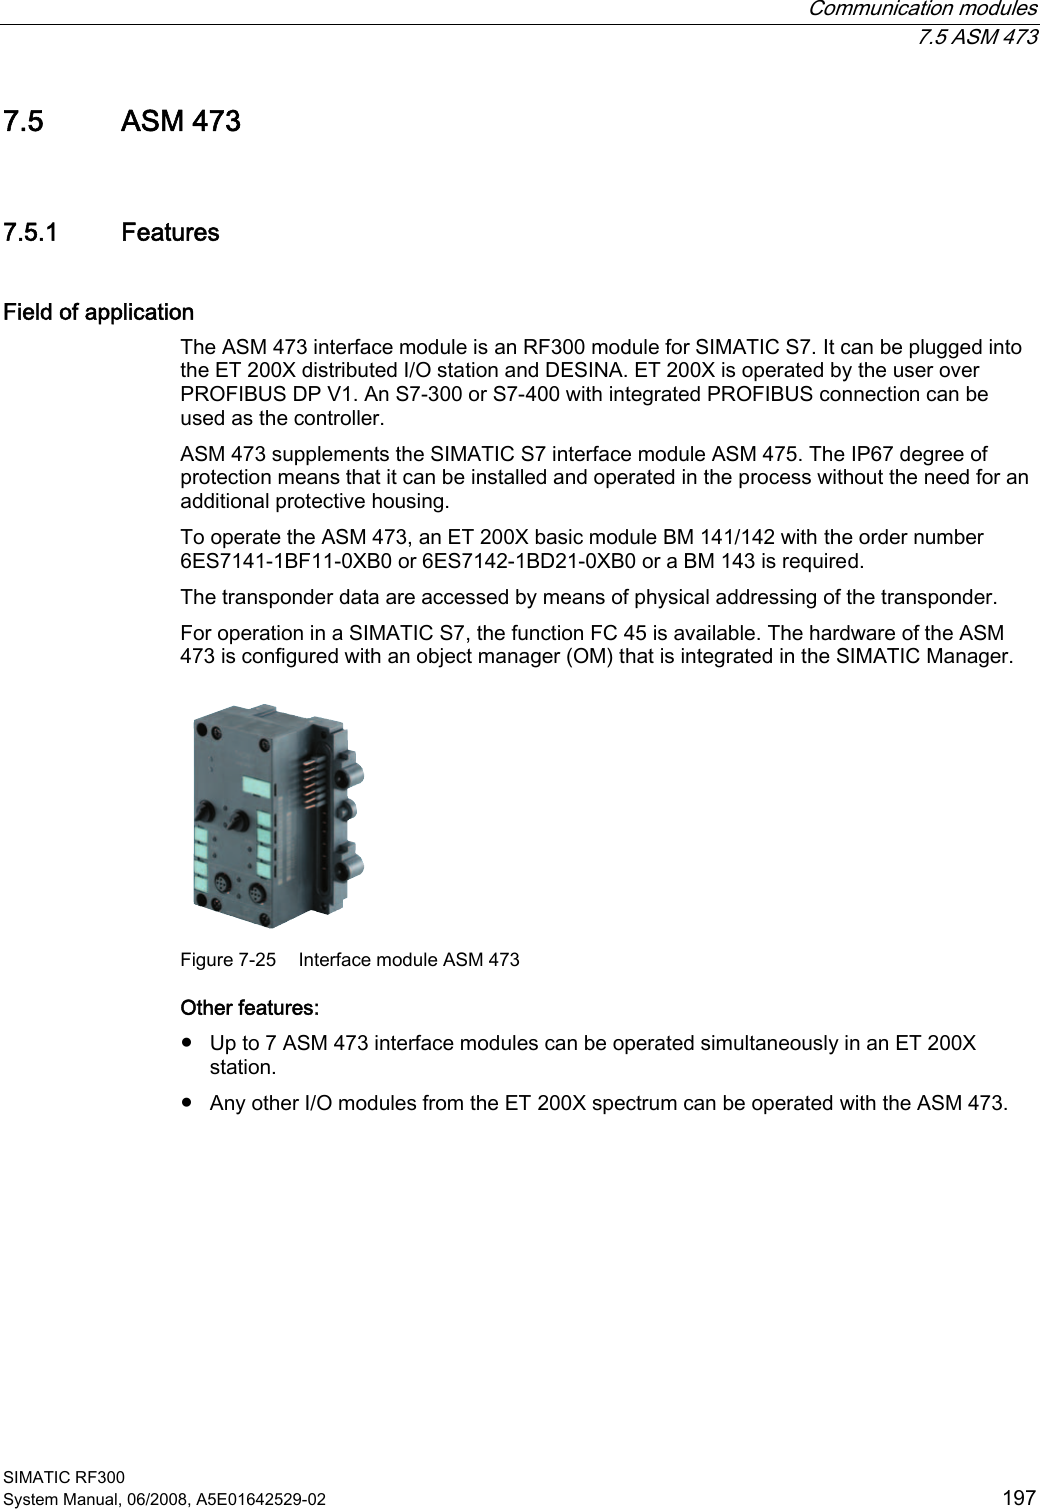  Communication modules  7.5 ASM 473 SIMATIC RF300 System Manual, 06/2008, A5E01642529-02  197 7.5 ASM 473 7.5.1 Features Field of application The ASM 473 interface module is an RF300 module for SIMATIC S7. It can be plugged into the ET 200X distributed I/O station and DESINA. ET 200X is operated by the user over PROFIBUS DP V1. An S7-300 or S7-400 with integrated PROFIBUS connection can be used as the controller.  ASM 473 supplements the SIMATIC S7 interface module ASM 475. The IP67 degree of protection means that it can be installed and operated in the process without the need for an additional protective housing. To operate the ASM 473, an ET 200X basic module BM 141/142 with the order number 6ES7141-1BF11-0XB0 or 6ES7142-1BD21-0XB0 or a BM 143 is required. The transponder data are accessed by means of physical addressing of the transponder. For operation in a SIMATIC S7, the function FC 45 is available. The hardware of the ASM 473 is configured with an object manager (OM) that is integrated in the SIMATIC Manager.  Figure 7-25  Interface module ASM 473 Other features: ● Up to 7 ASM 473 interface modules can be operated simultaneously in an ET 200X station.  ● Any other I/O modules from the ET 200X spectrum can be operated with the ASM 473. 